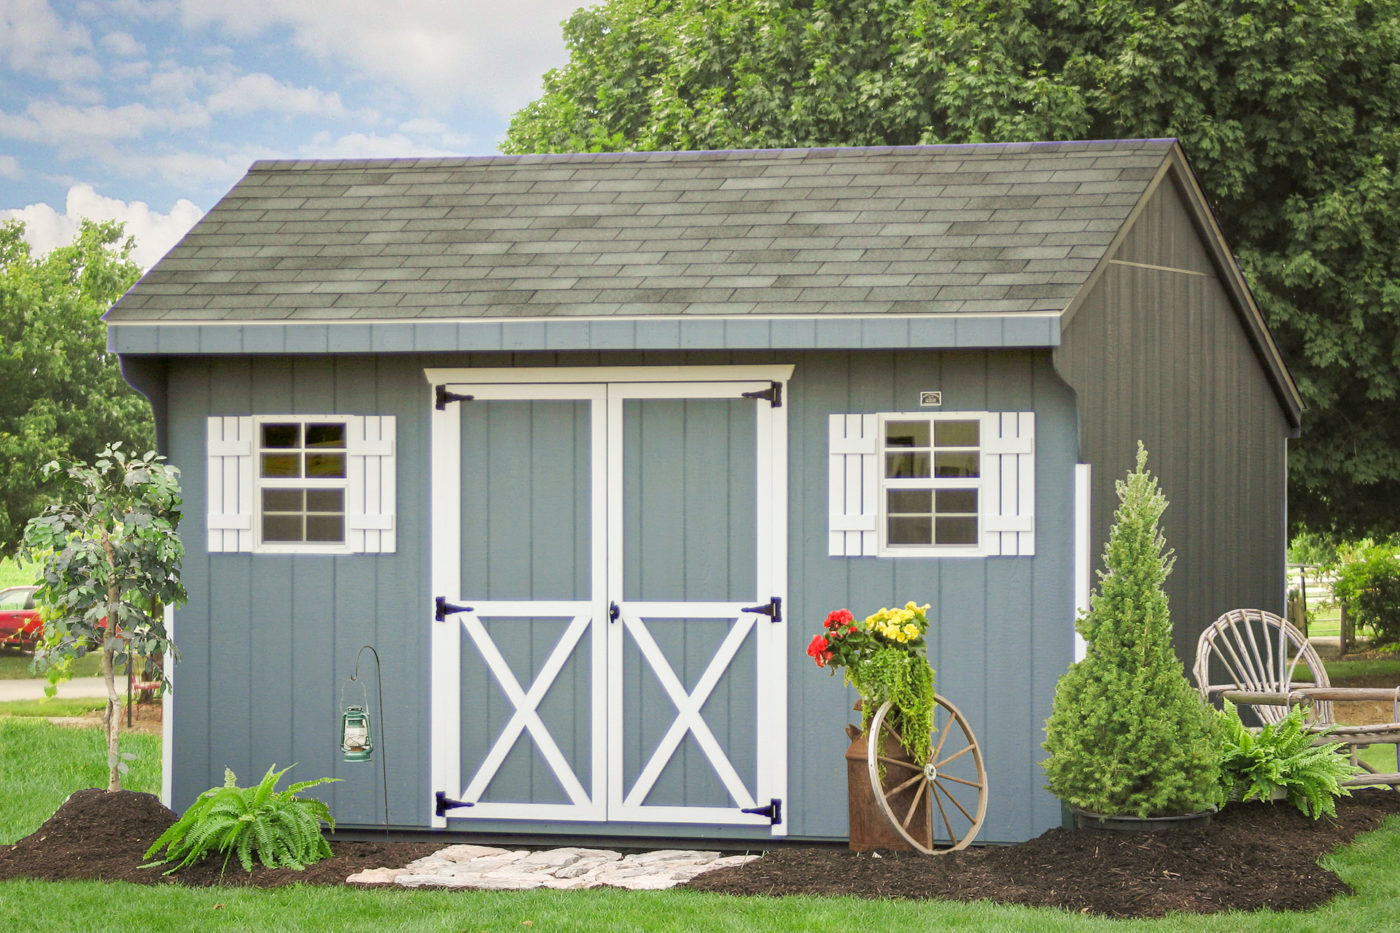 A garden shed kit with wood siding